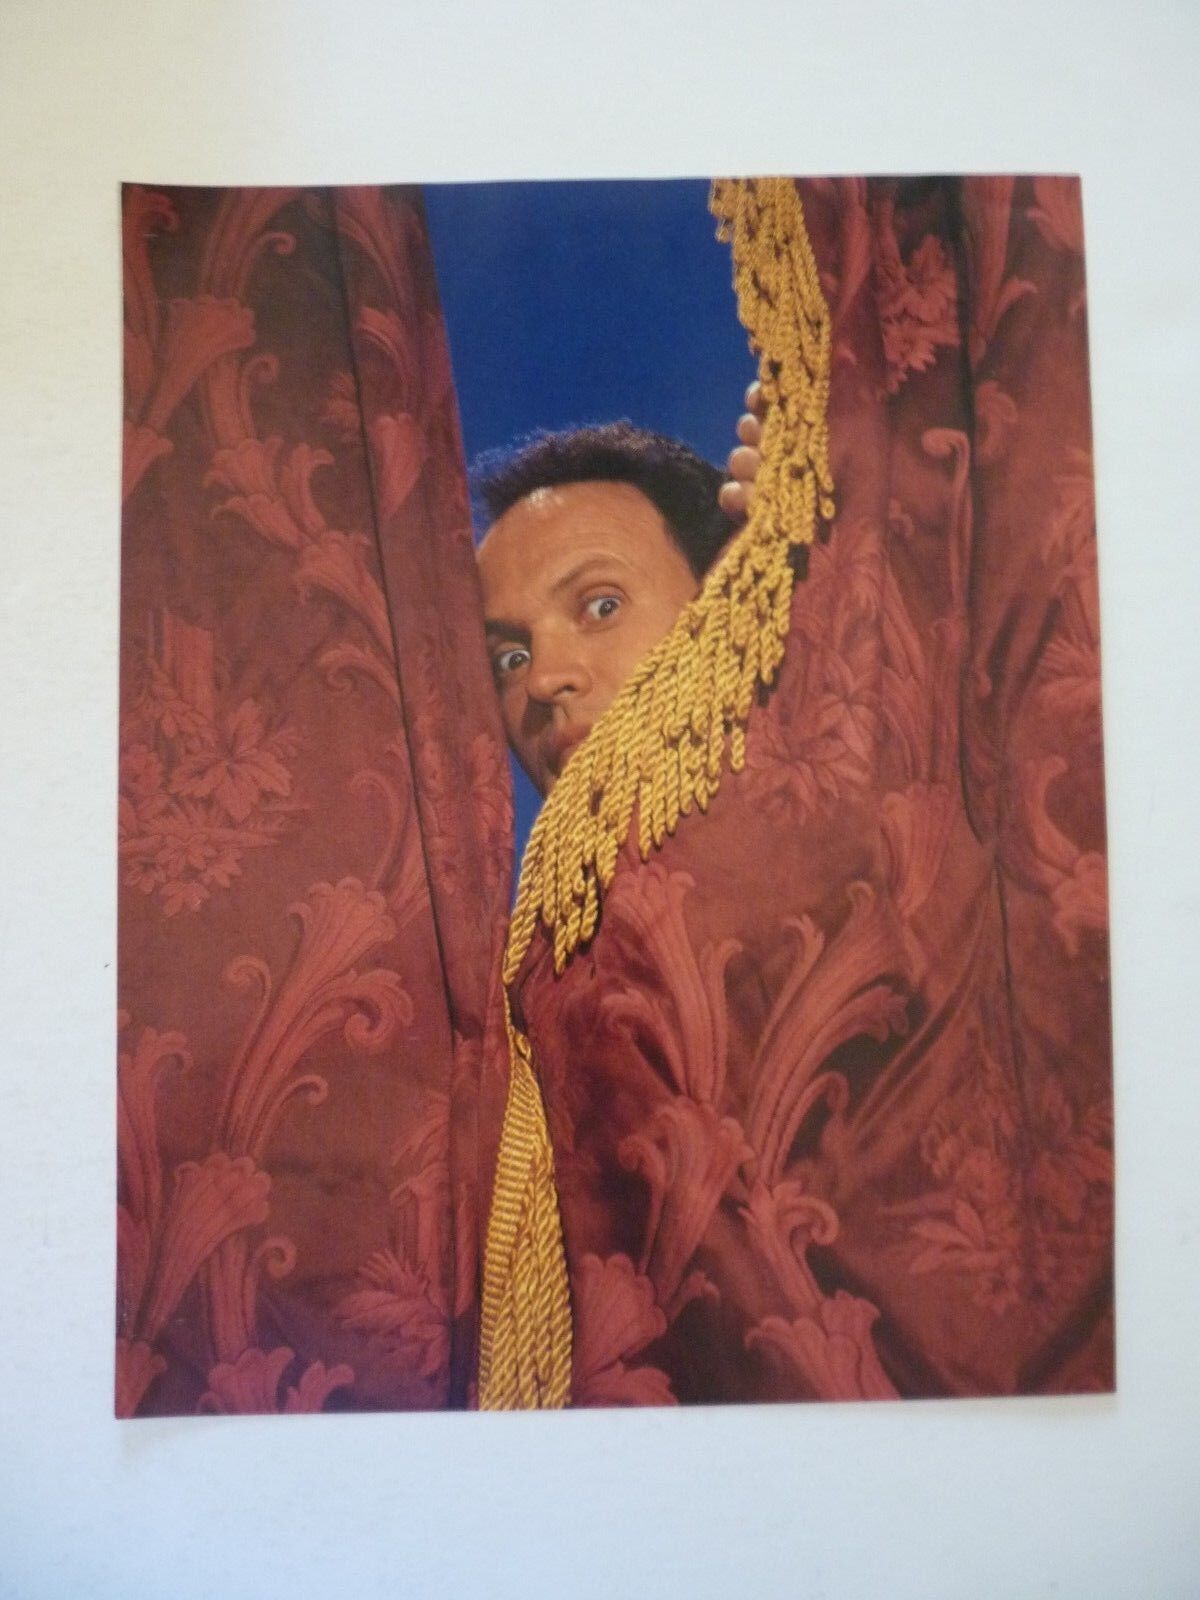 Billy Crystal Single Sided Coffee Table Book Photo Poster painting Page 8.5x11 #2